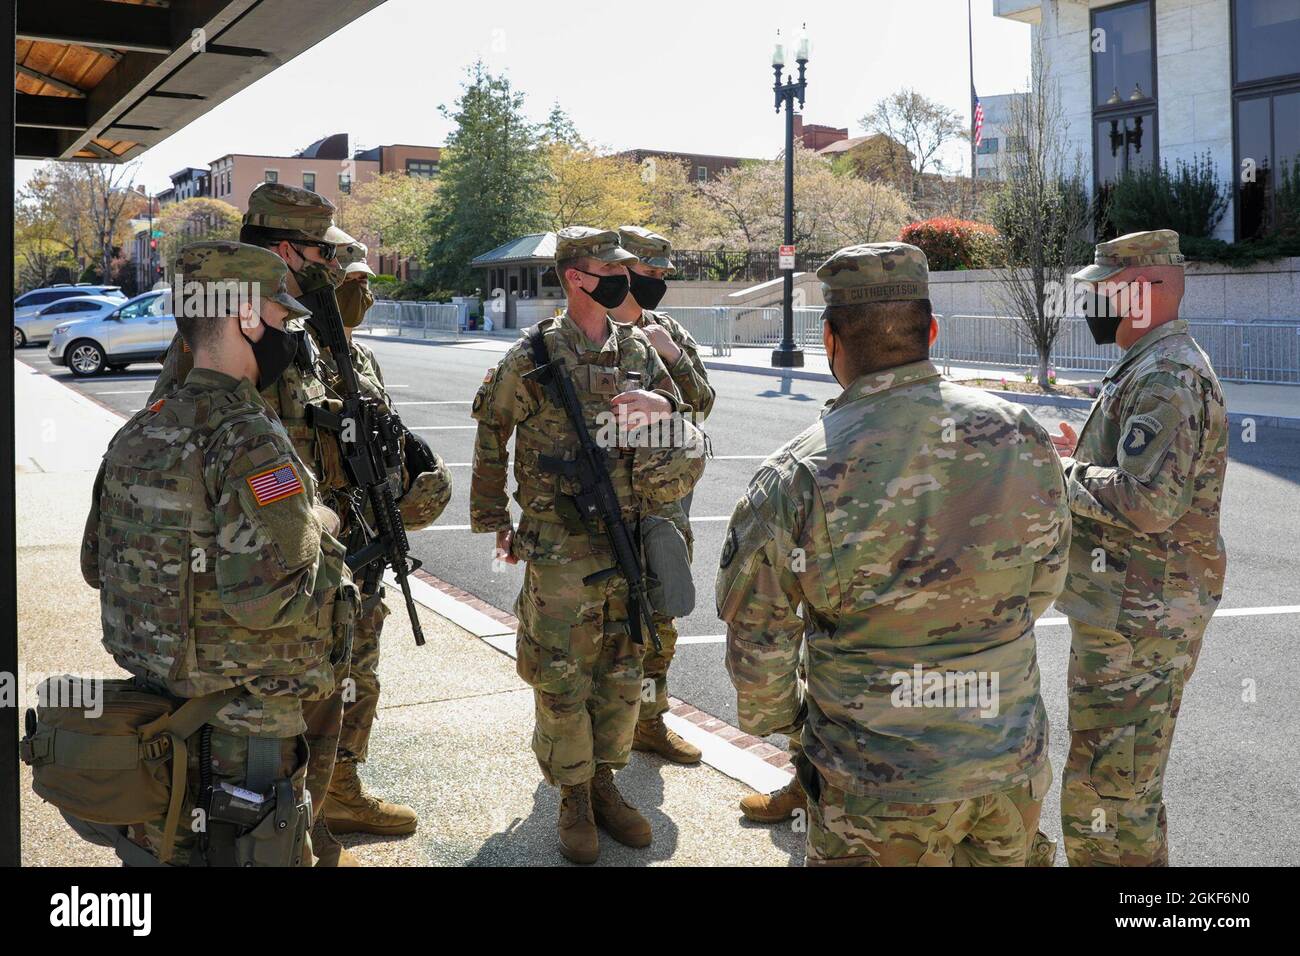 U.S. Army Master Sgt. Joshua Barker, far right, acting first sergeant of the task force and senior engineer of 101st Main Command Post Operational Detachment, Kentucky National Guard, addresses a group of Soldiers near the U.S. Capitol in Washington, D.C., April 6, 2021. The National Guard has been requested to continue supporting federal law enforcement agencies with security, communications, medical evacuation, logistics, and safety support to state, district and federal agencies through mid-May. Stock Photo